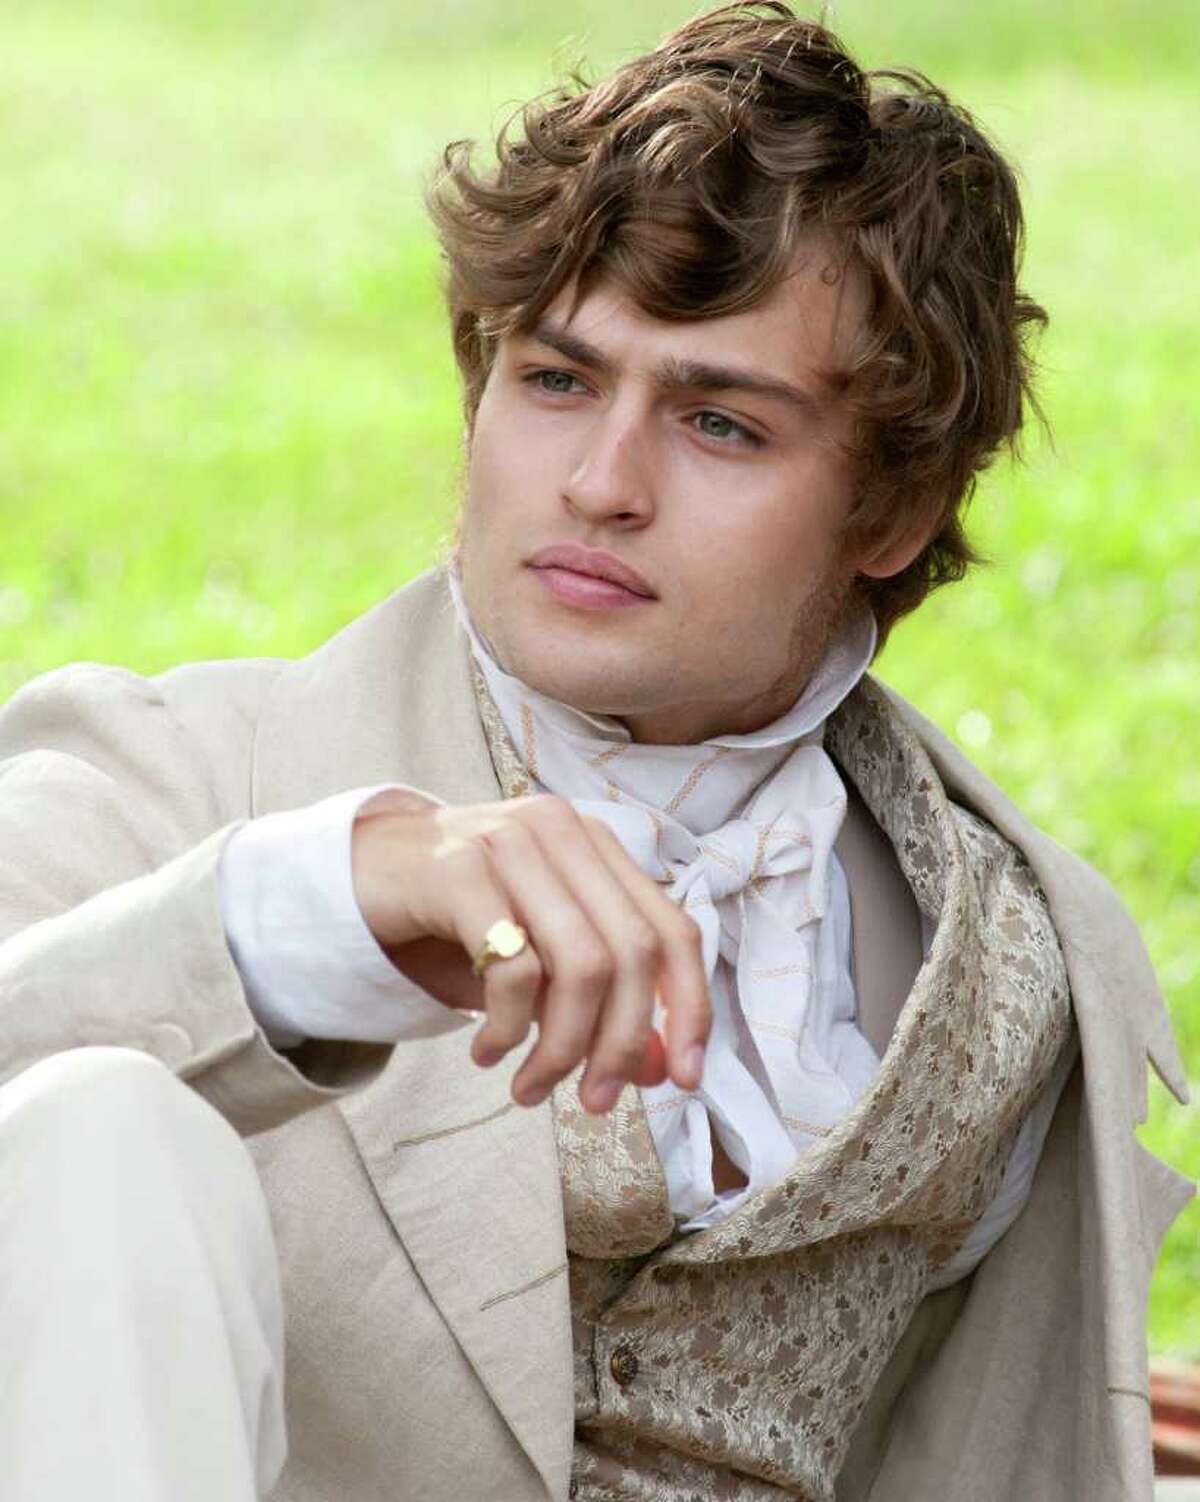 As Pip (Douglas Booth) grows into his privileged life, he becomes snobbish and ashamed of his past.